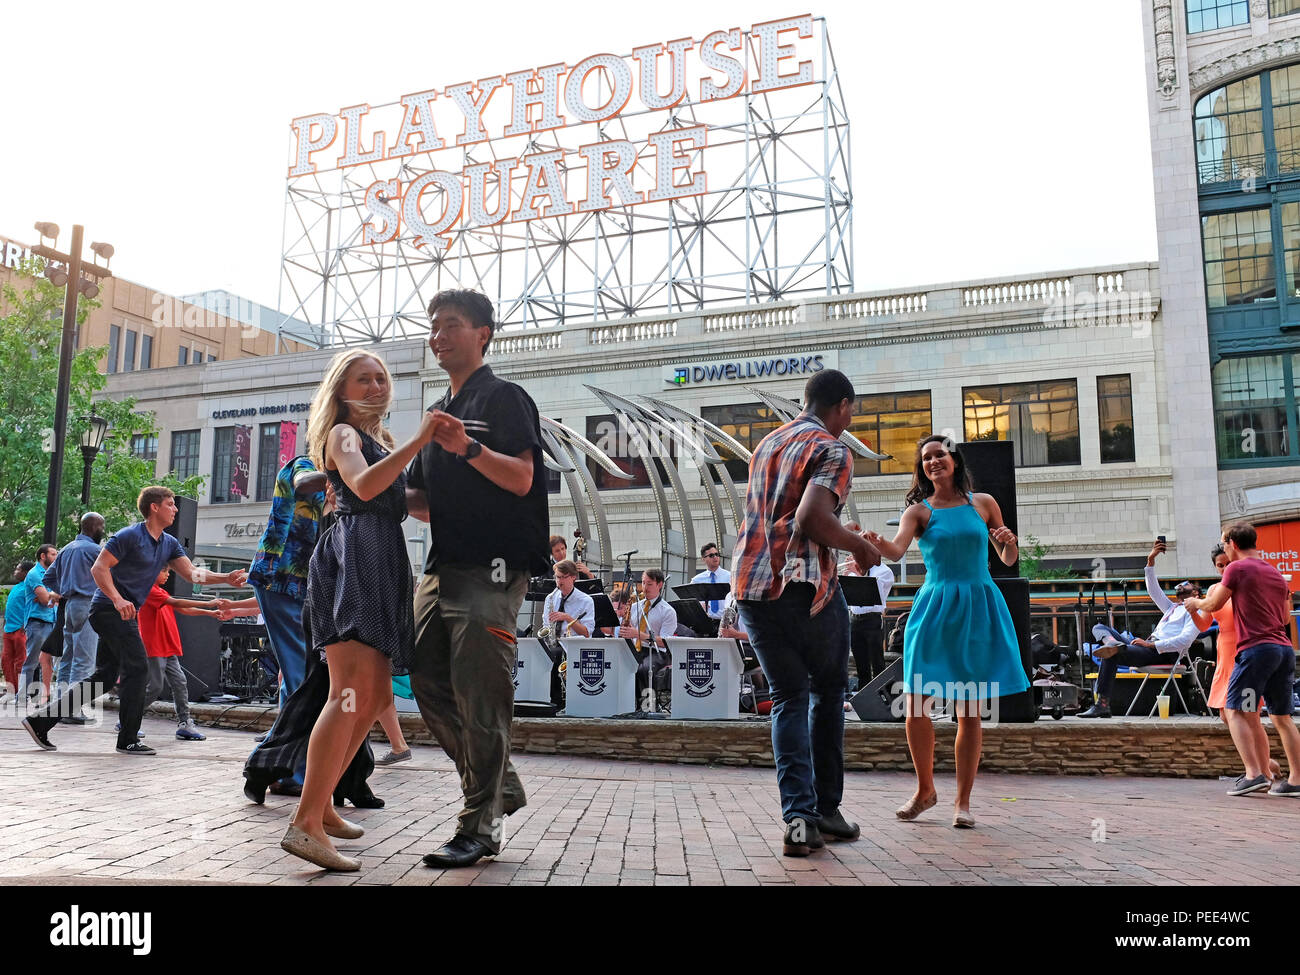 Summertime swing dancing outdoors to live band in Playhouse Square in Cleveland, Ohio, USA. Stock Photo